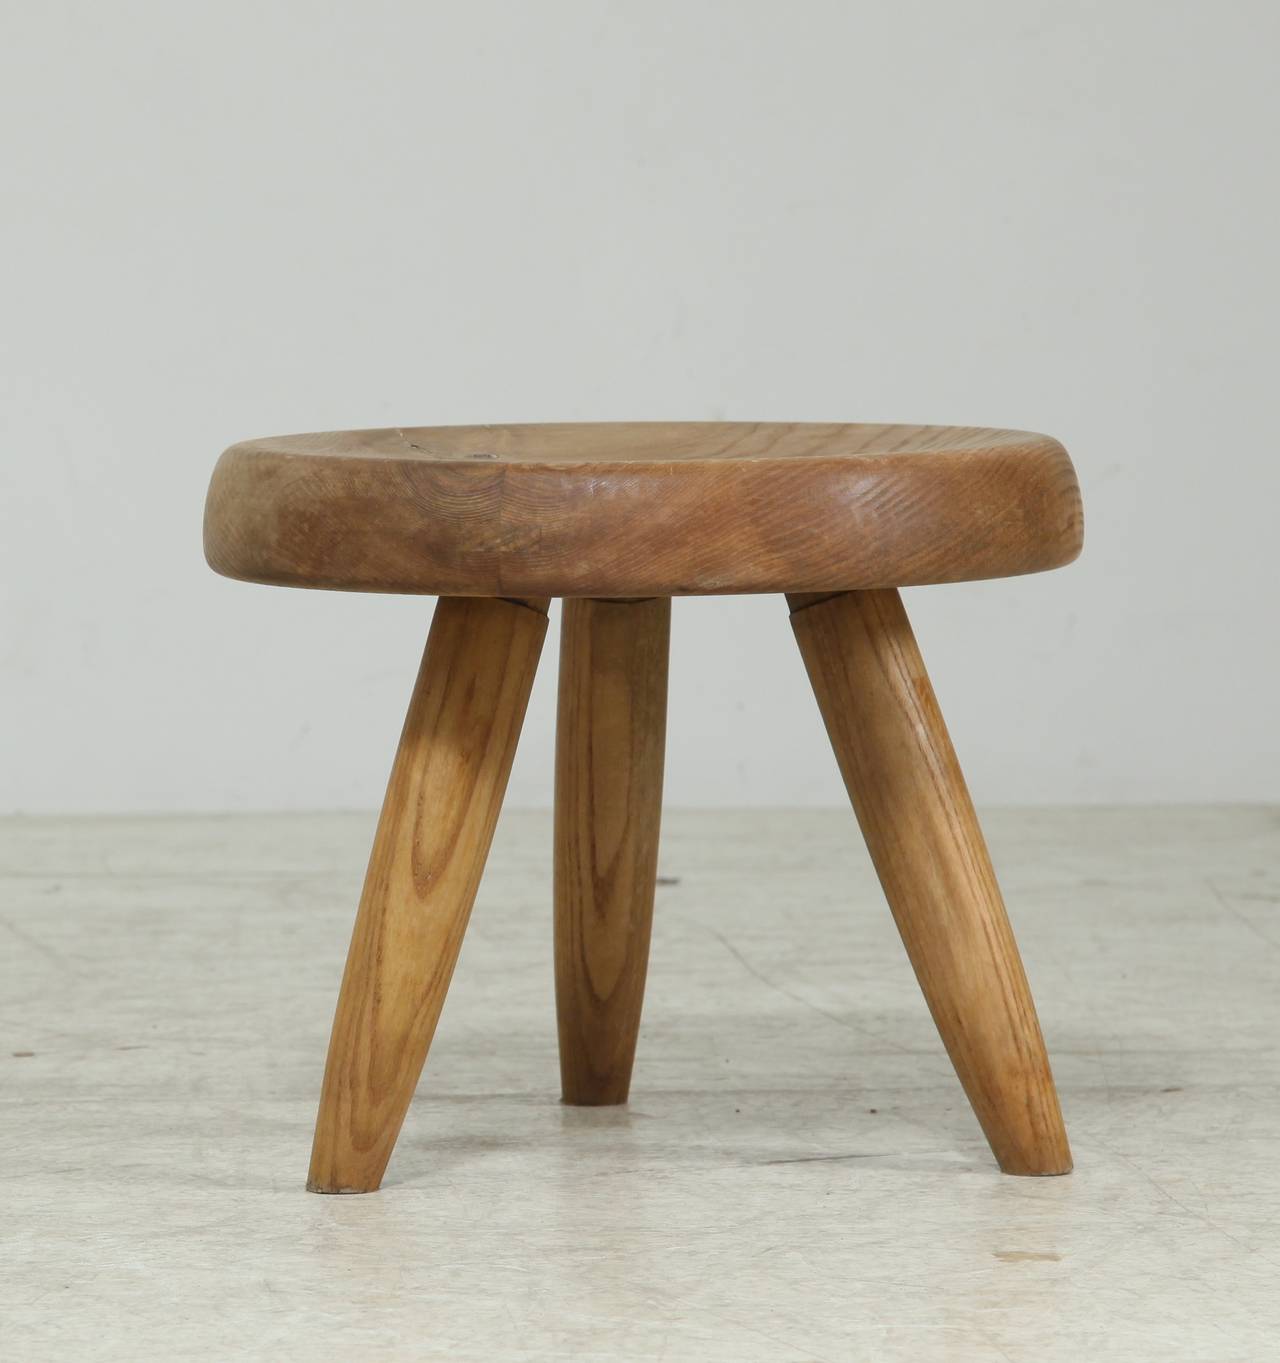 A Charlotte Perriand low tripod stool in a dark ash.